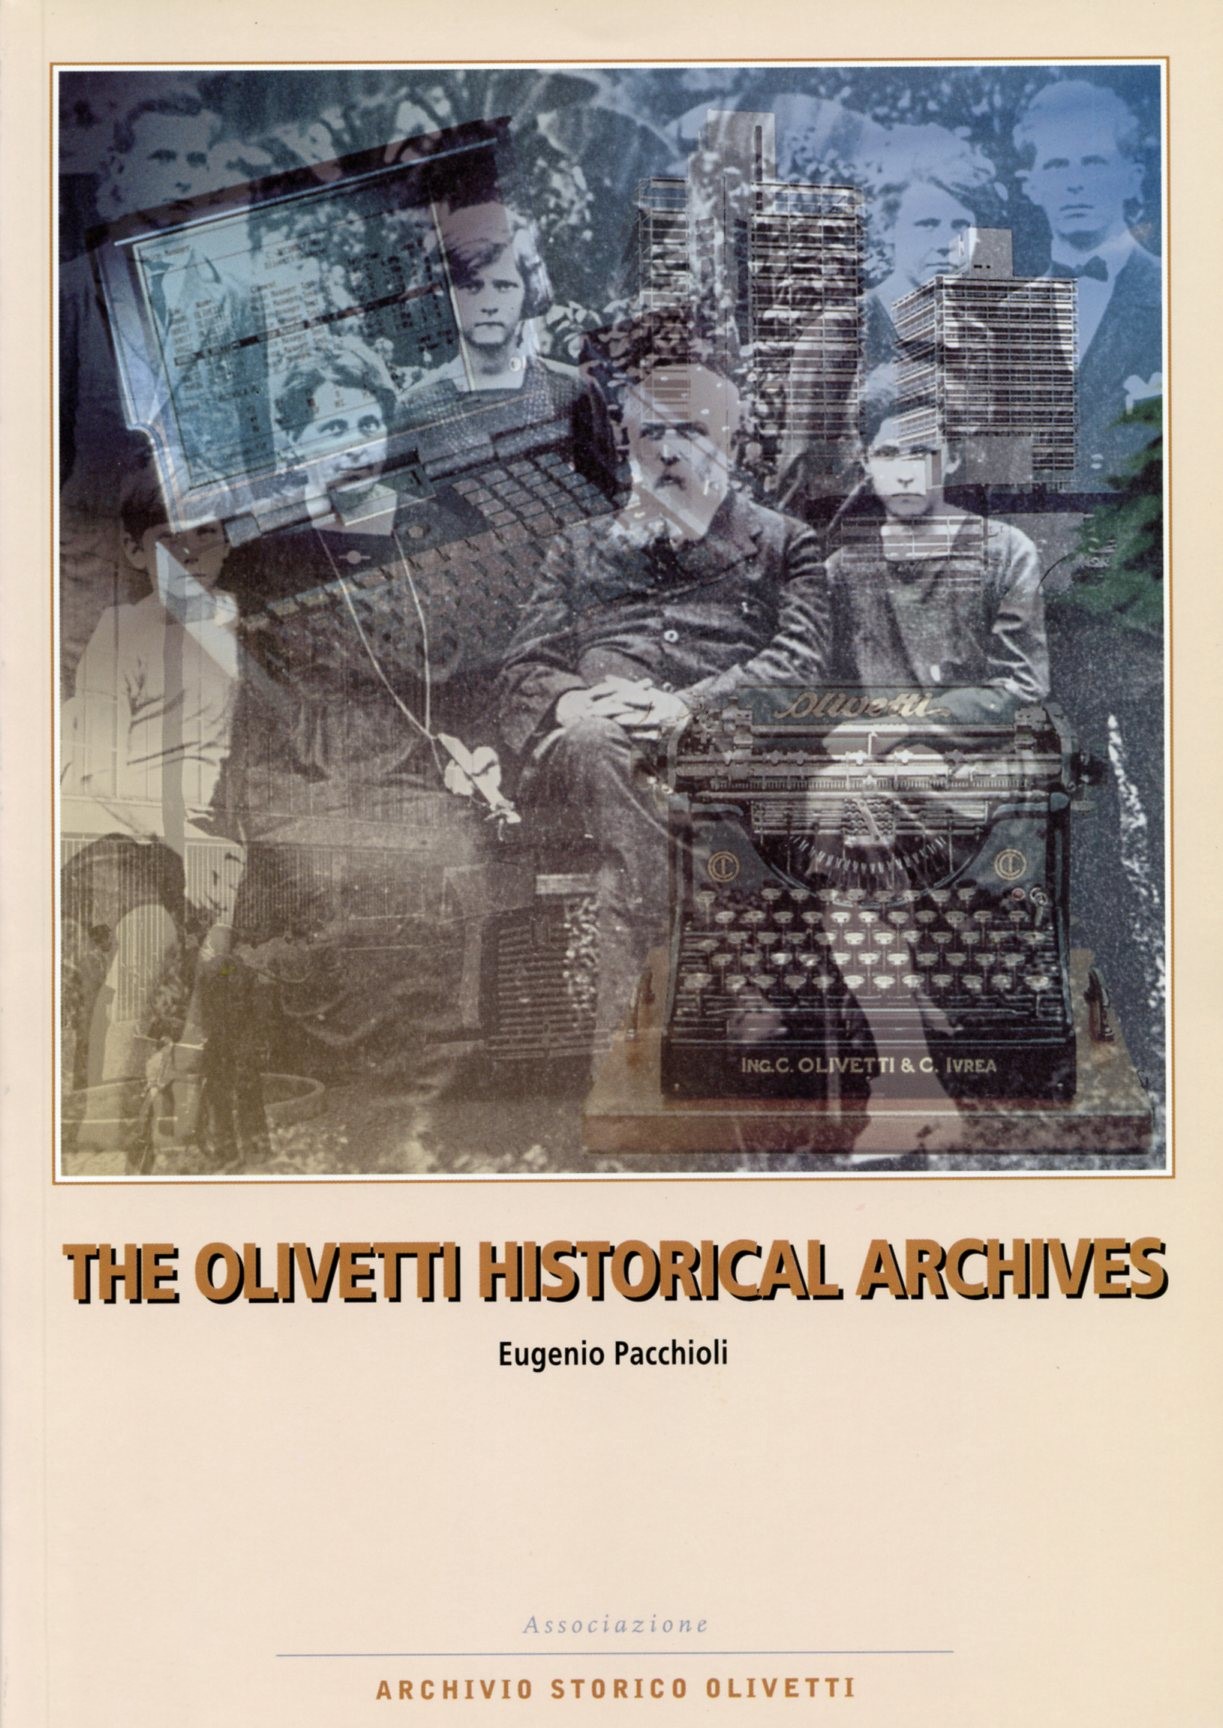 The Olivetti Historical Archives